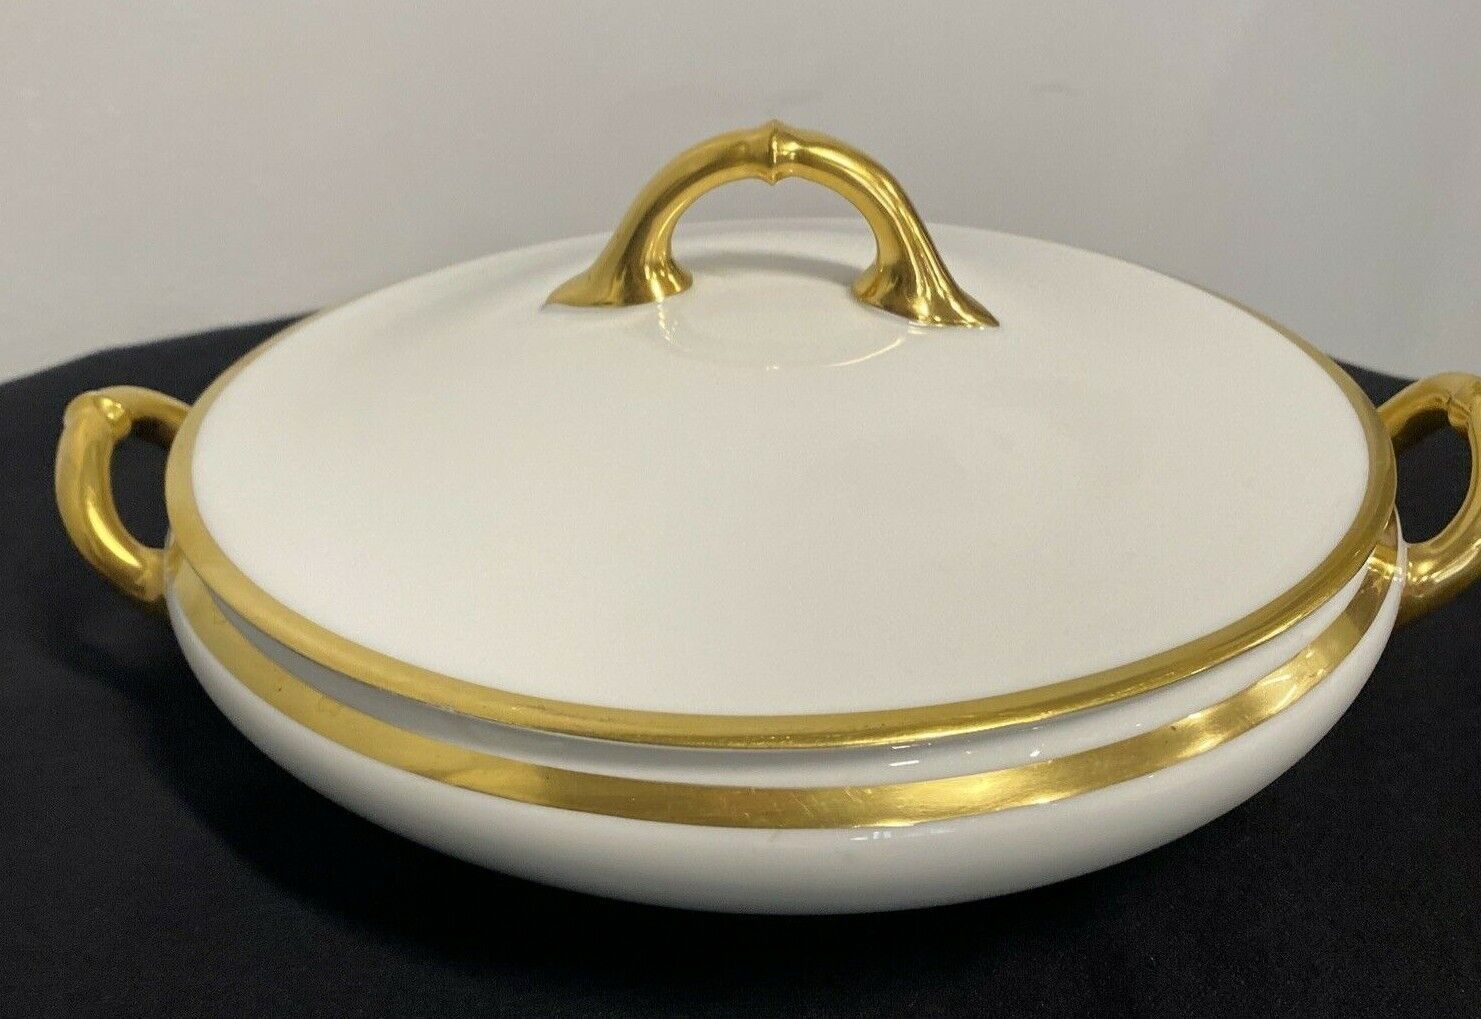 Primary image for H & Co Bavaria Vintage Tureen White with Gold Covered Dish Heinrich